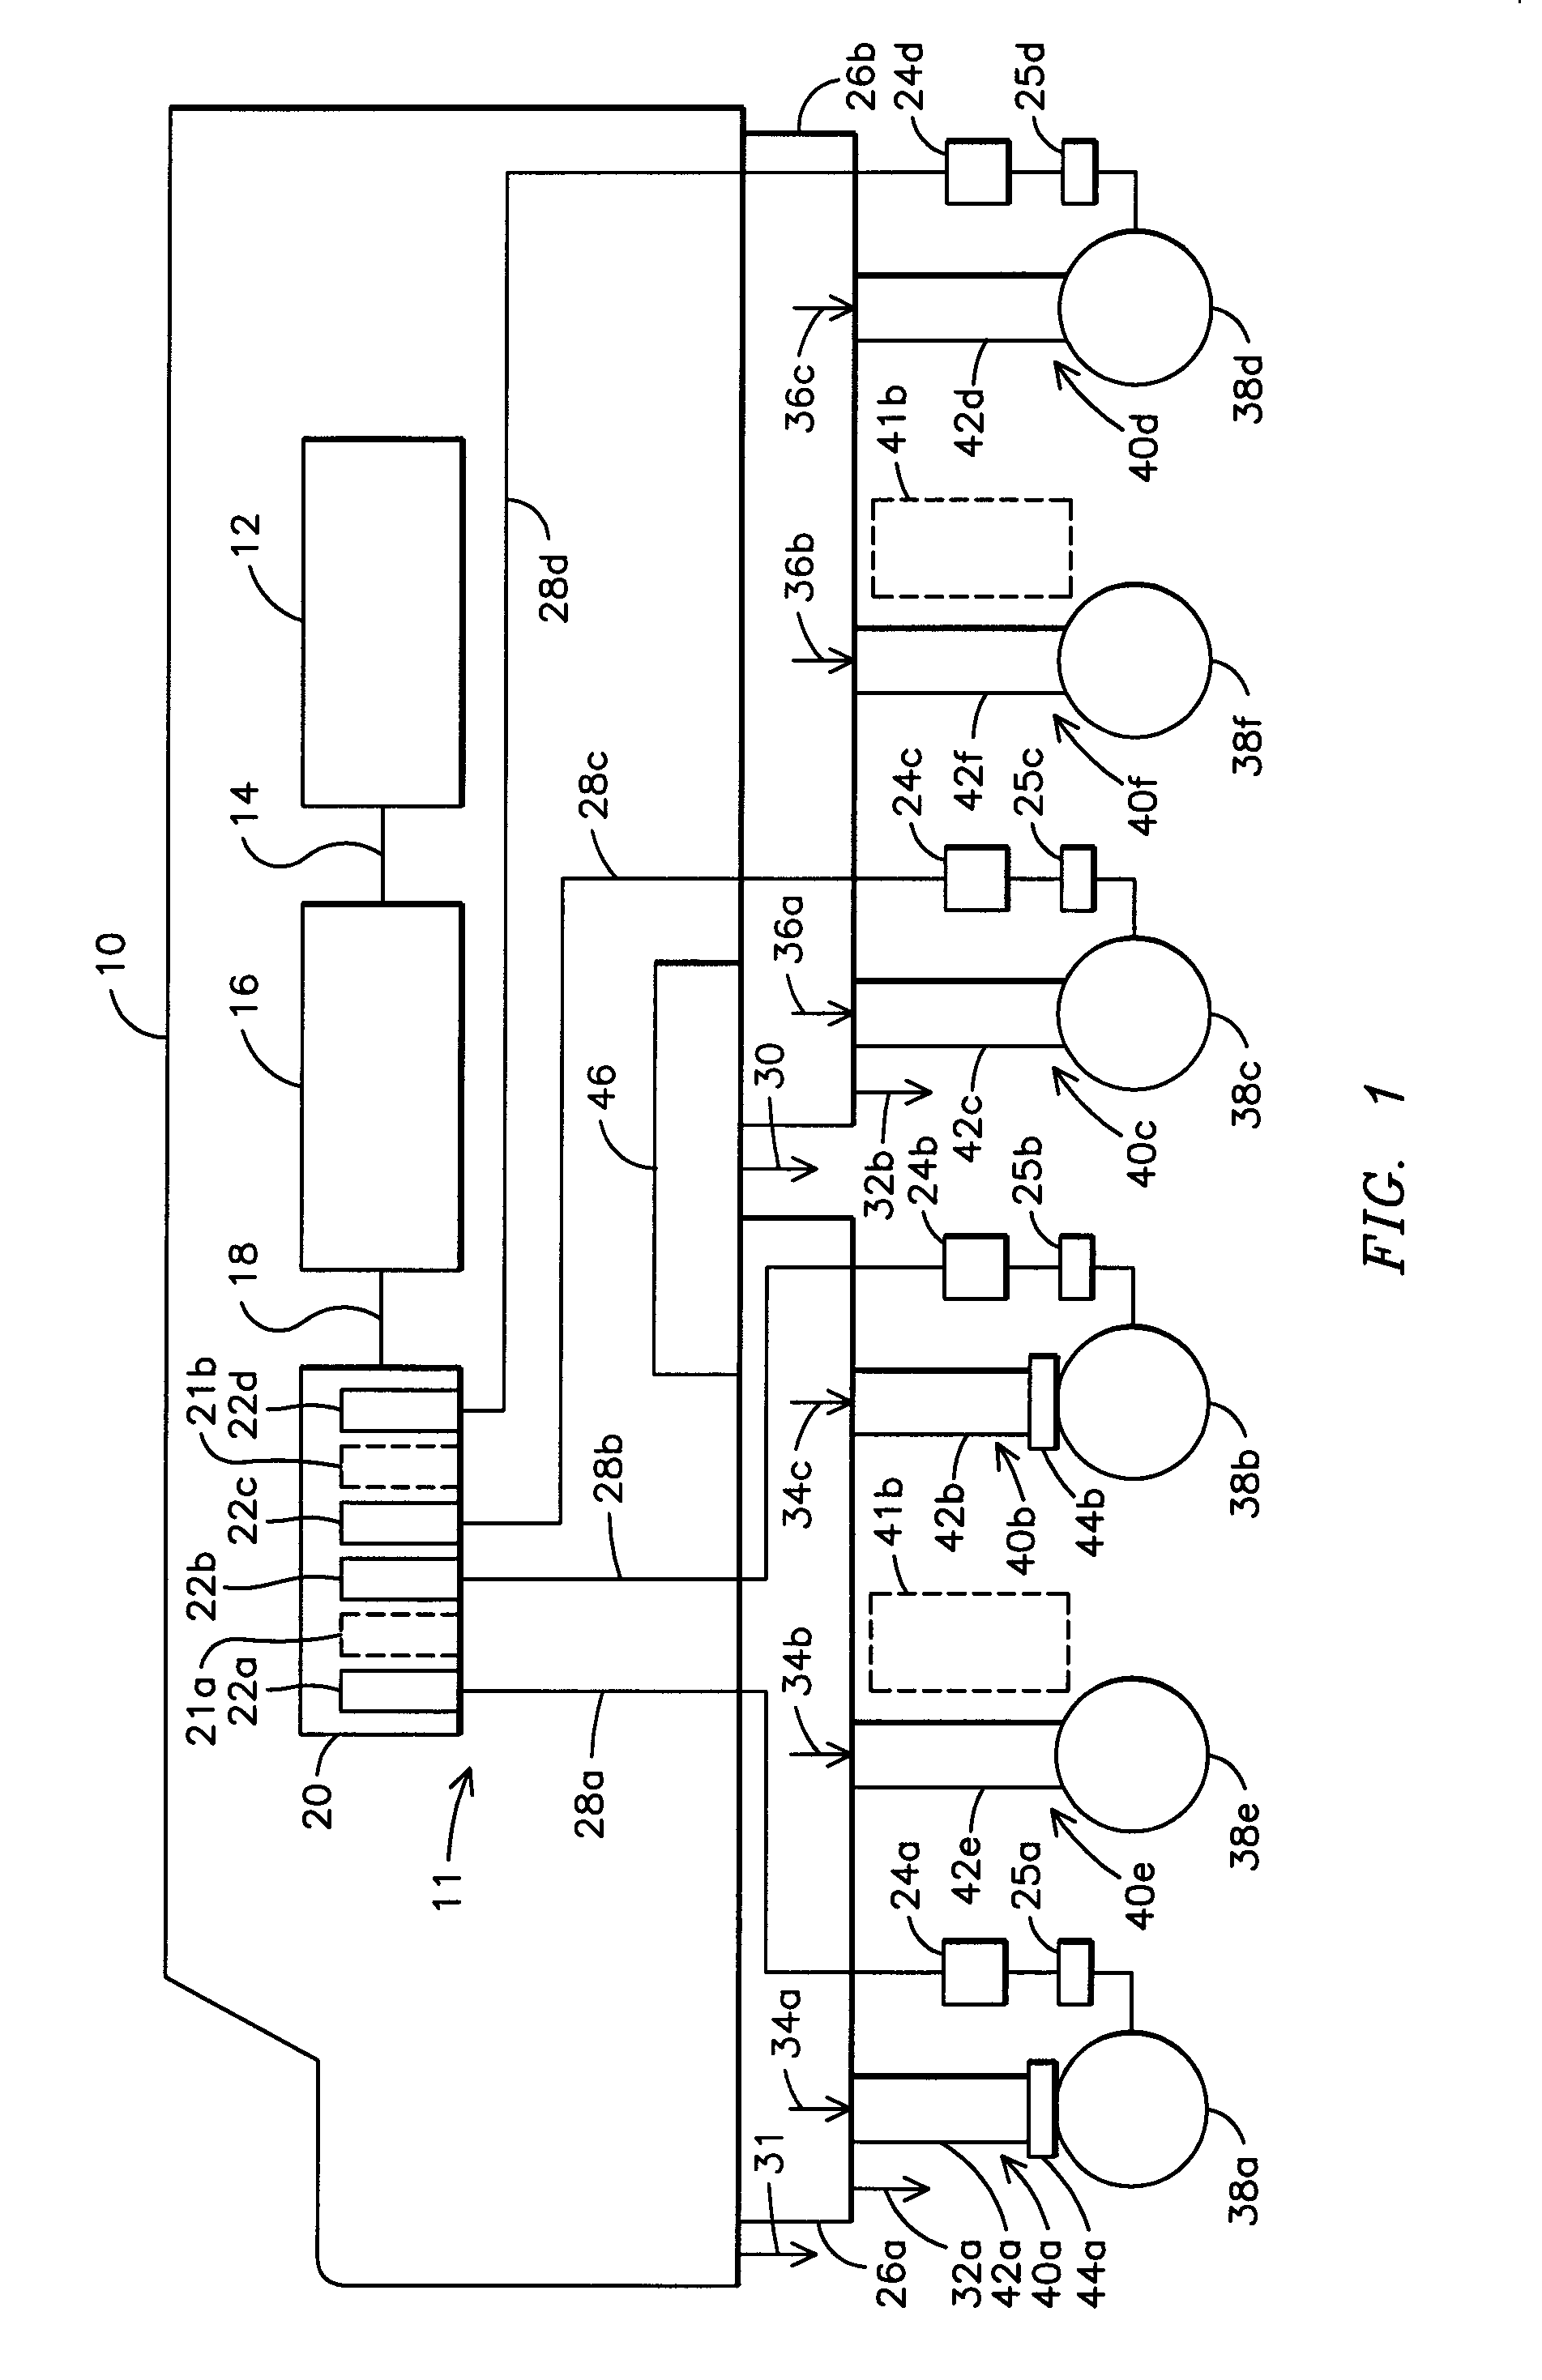 Kit and Method for Converting a Locomotive from a First Configuration to a Second Configuration